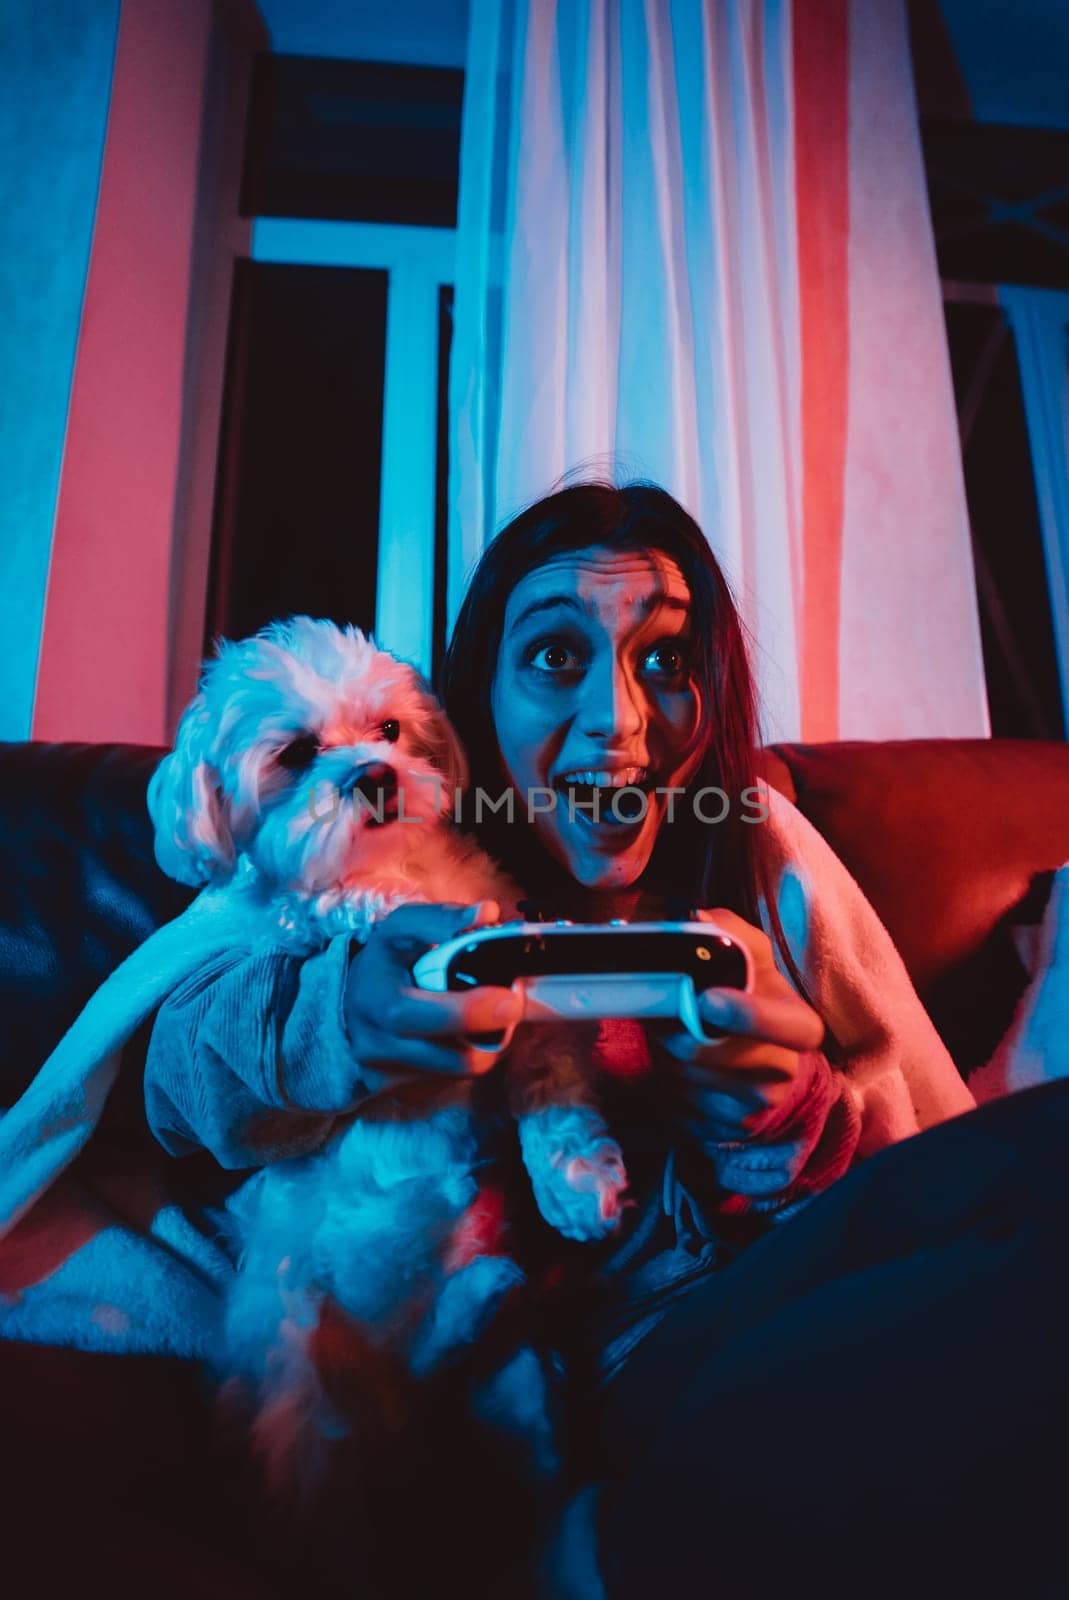 A gamer or a streamer girl at home in a dark room with a game controller playing with her dog and sits in front of a monitor or TV. High quality photo